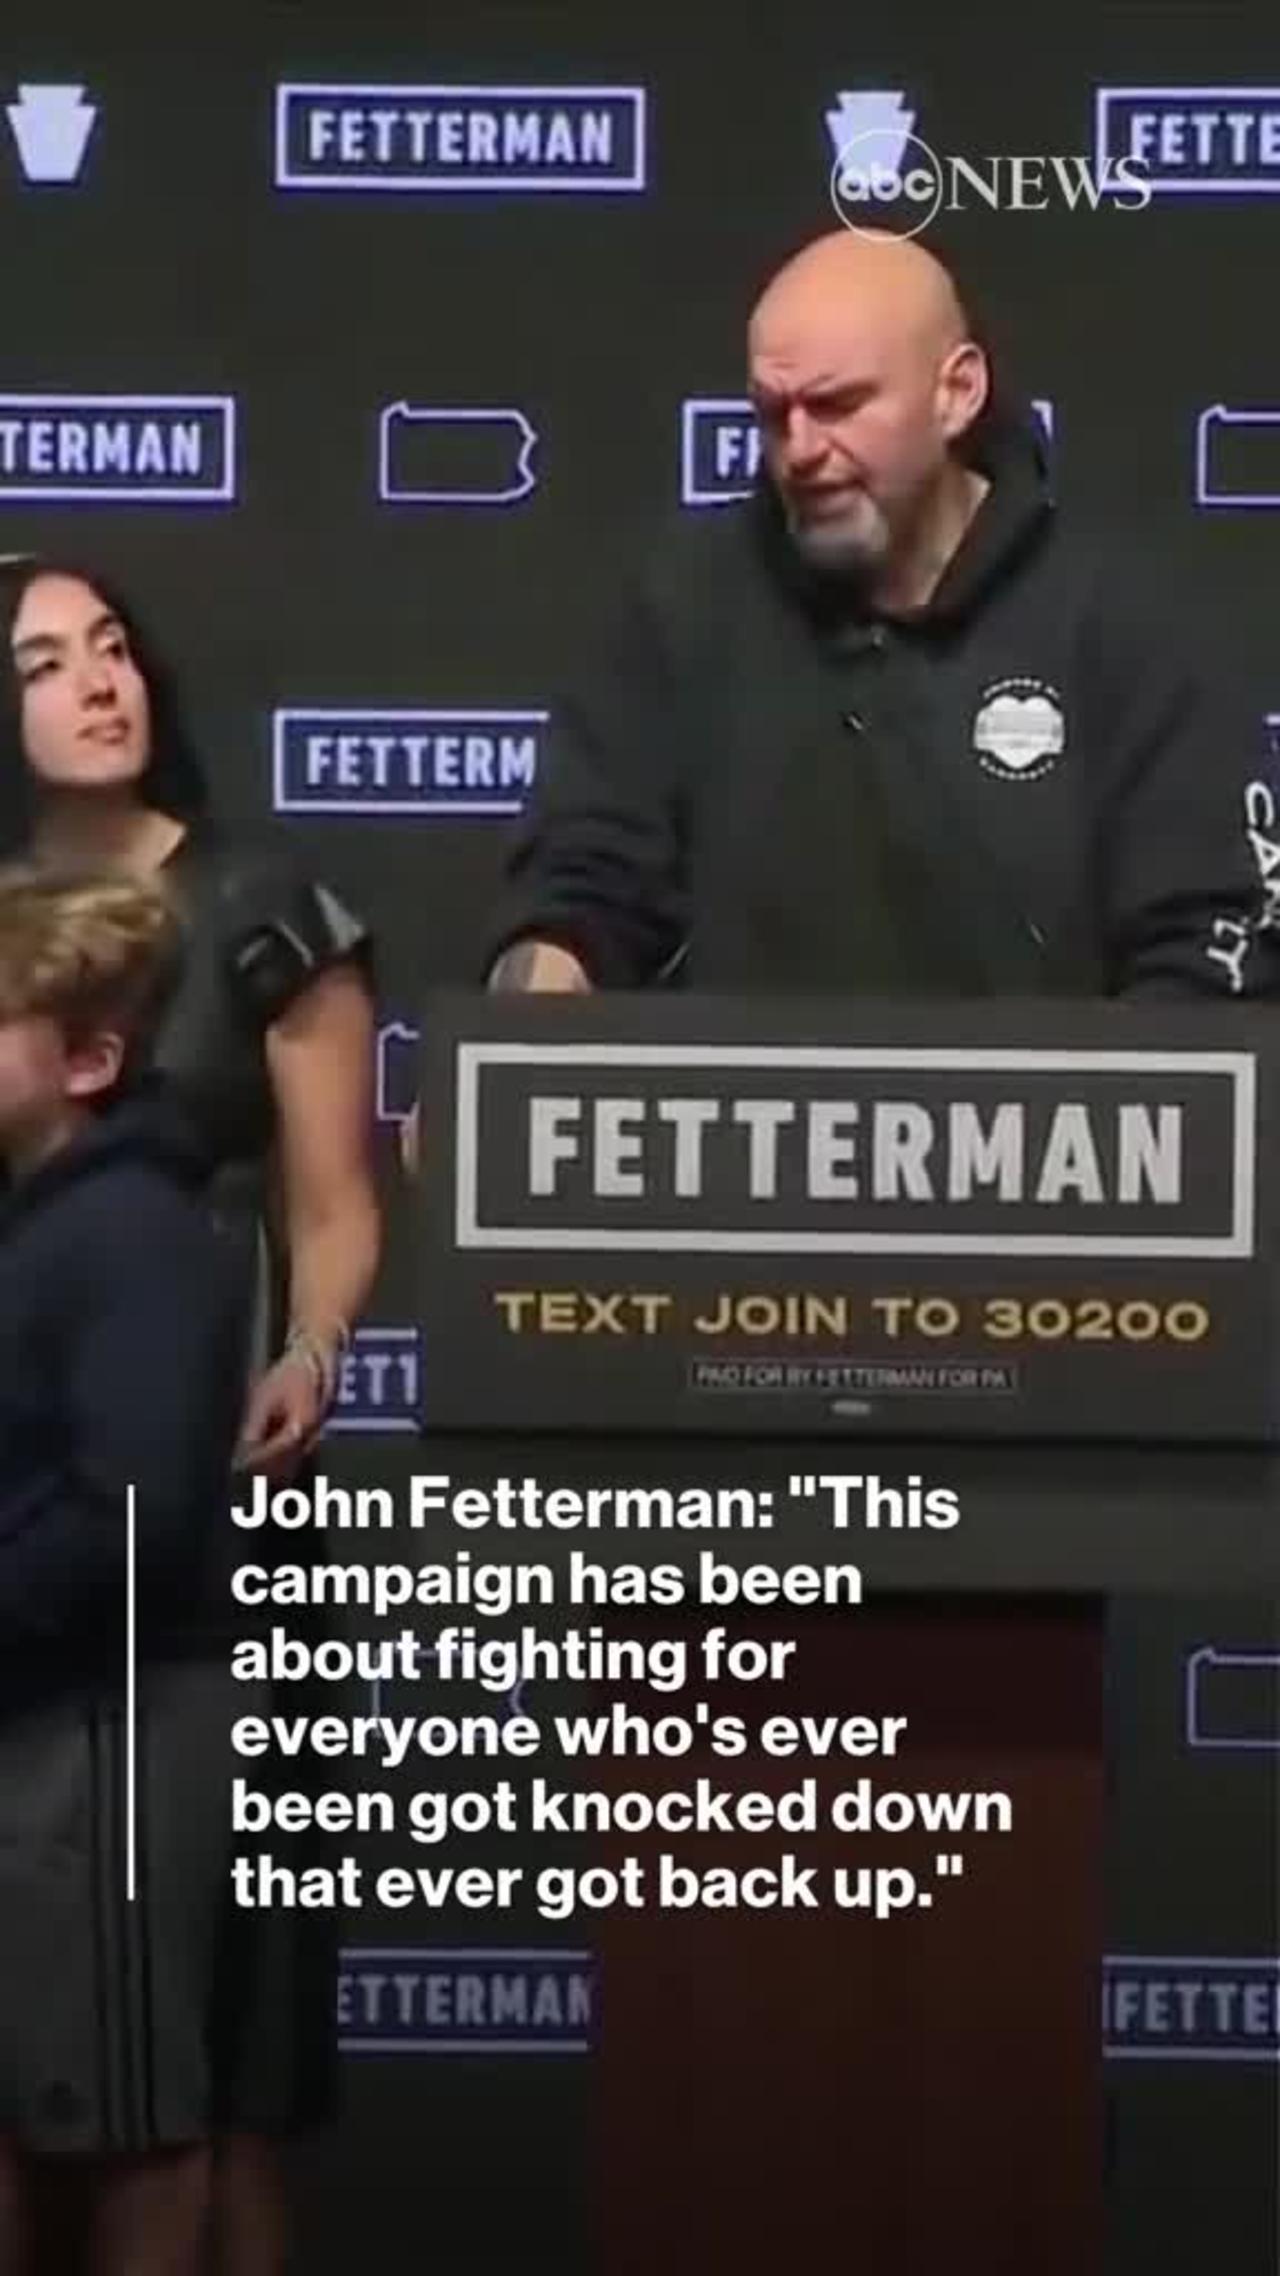 #Democrat John #Fetterman after being projected to win the #Pennsylvania #Senate race: